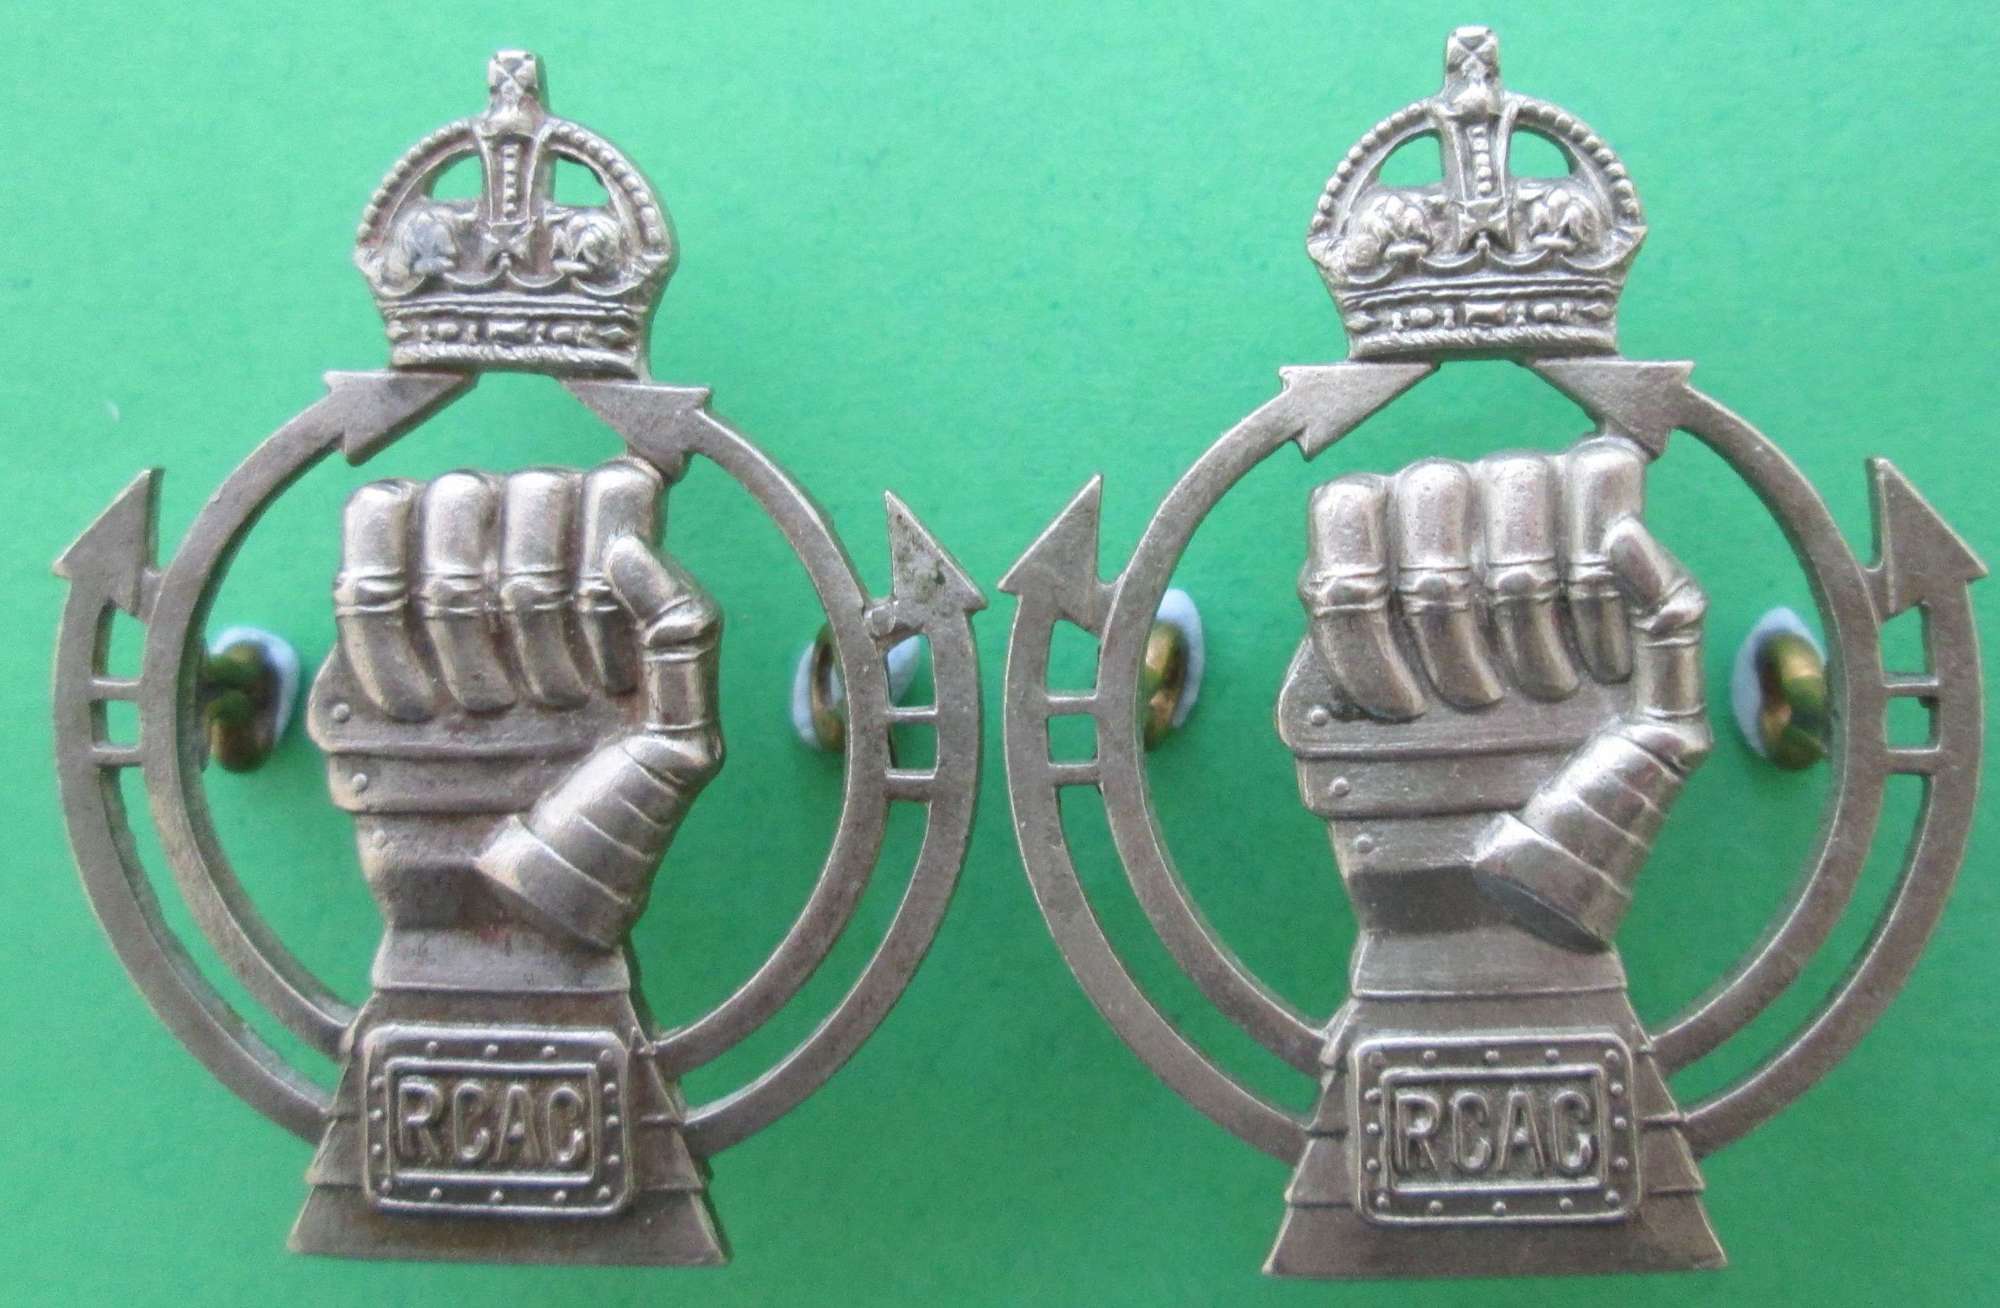 A PAIR OF ROYAL CANADIAN ARMOURED CORPS COLLARS